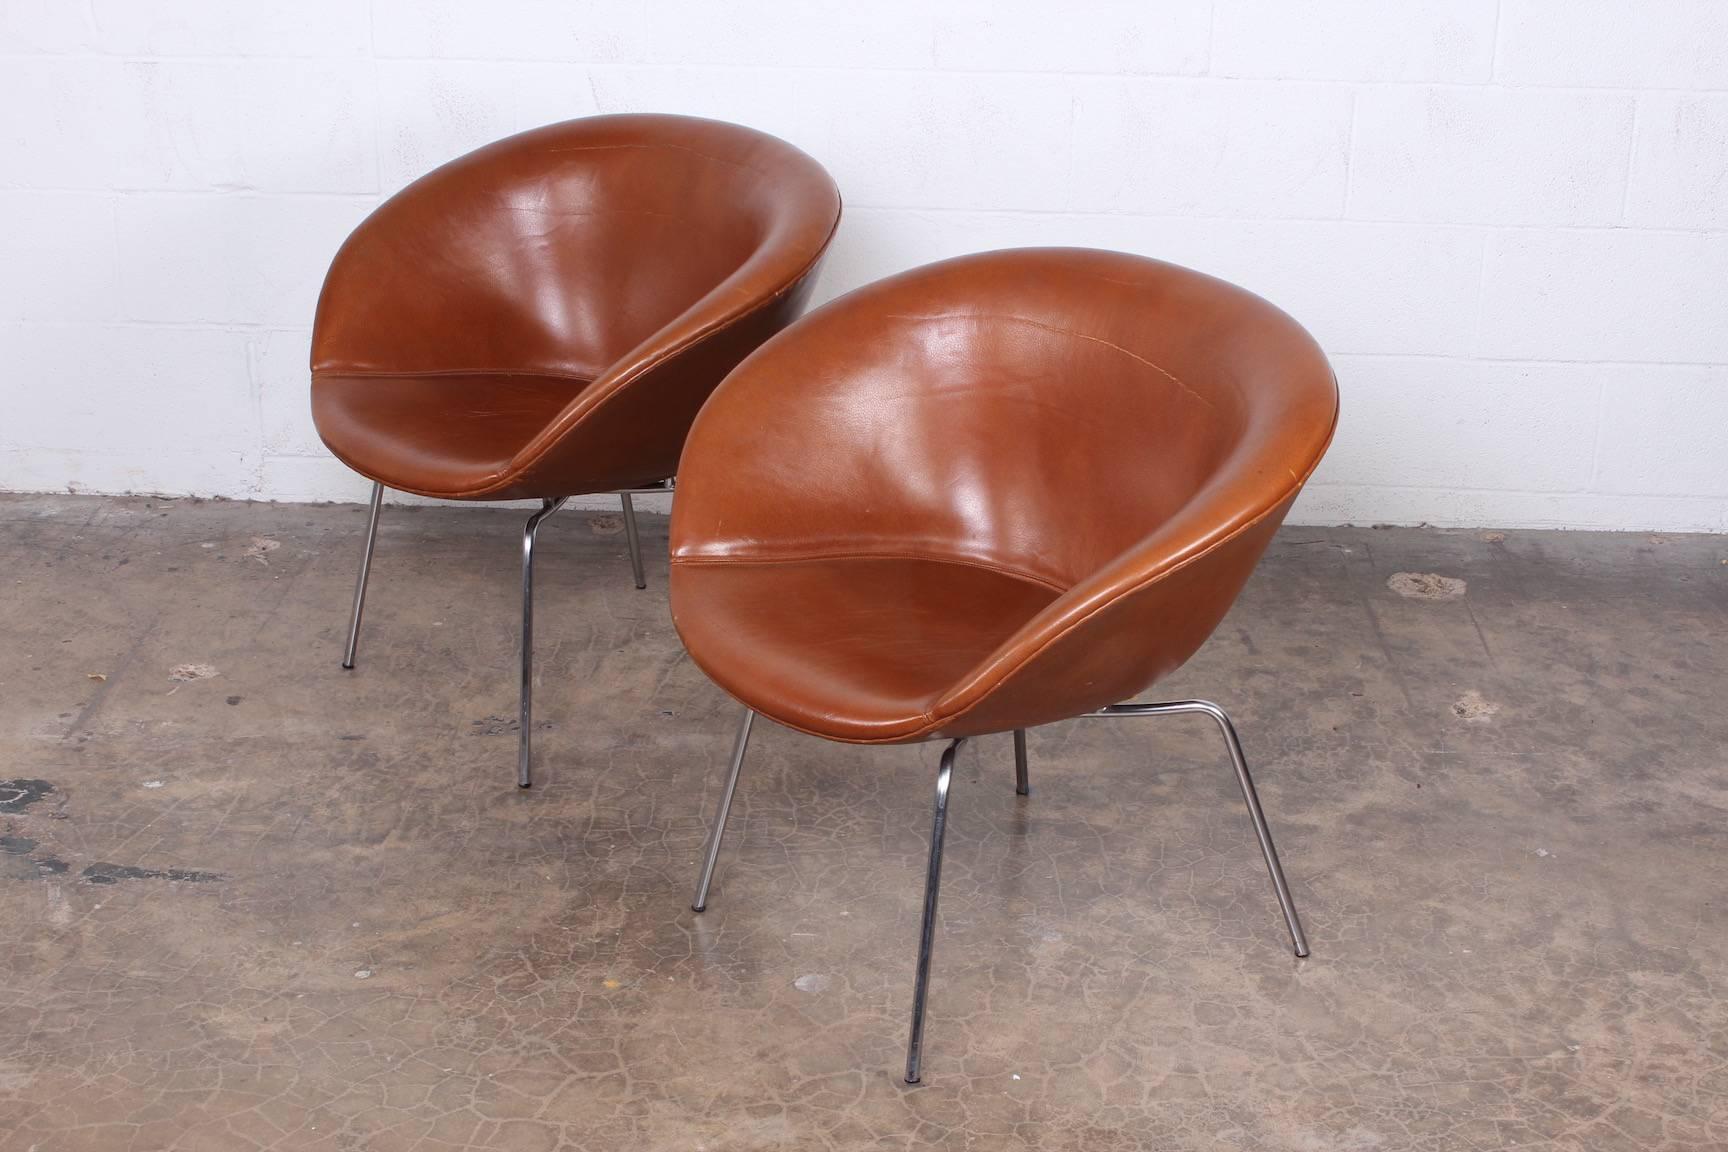 Arne Jacobsen Pot Chairs in Original Leather 1